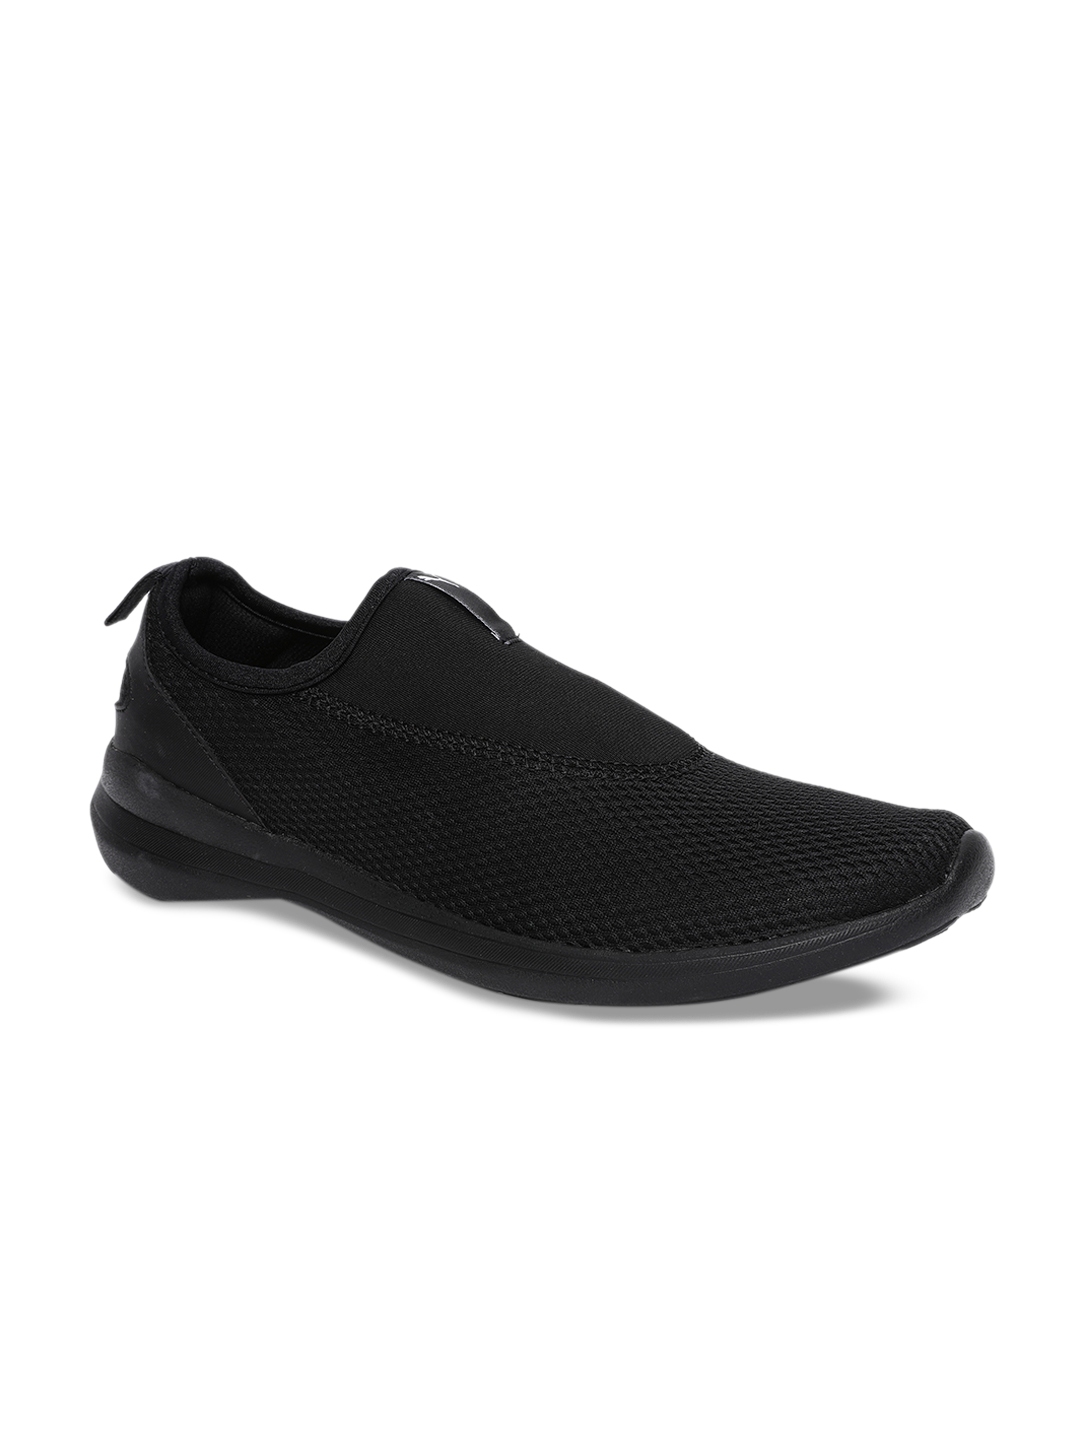 Buy Puma Men Black Solid Slip On Sneakers - Casual Shoes for Men ...